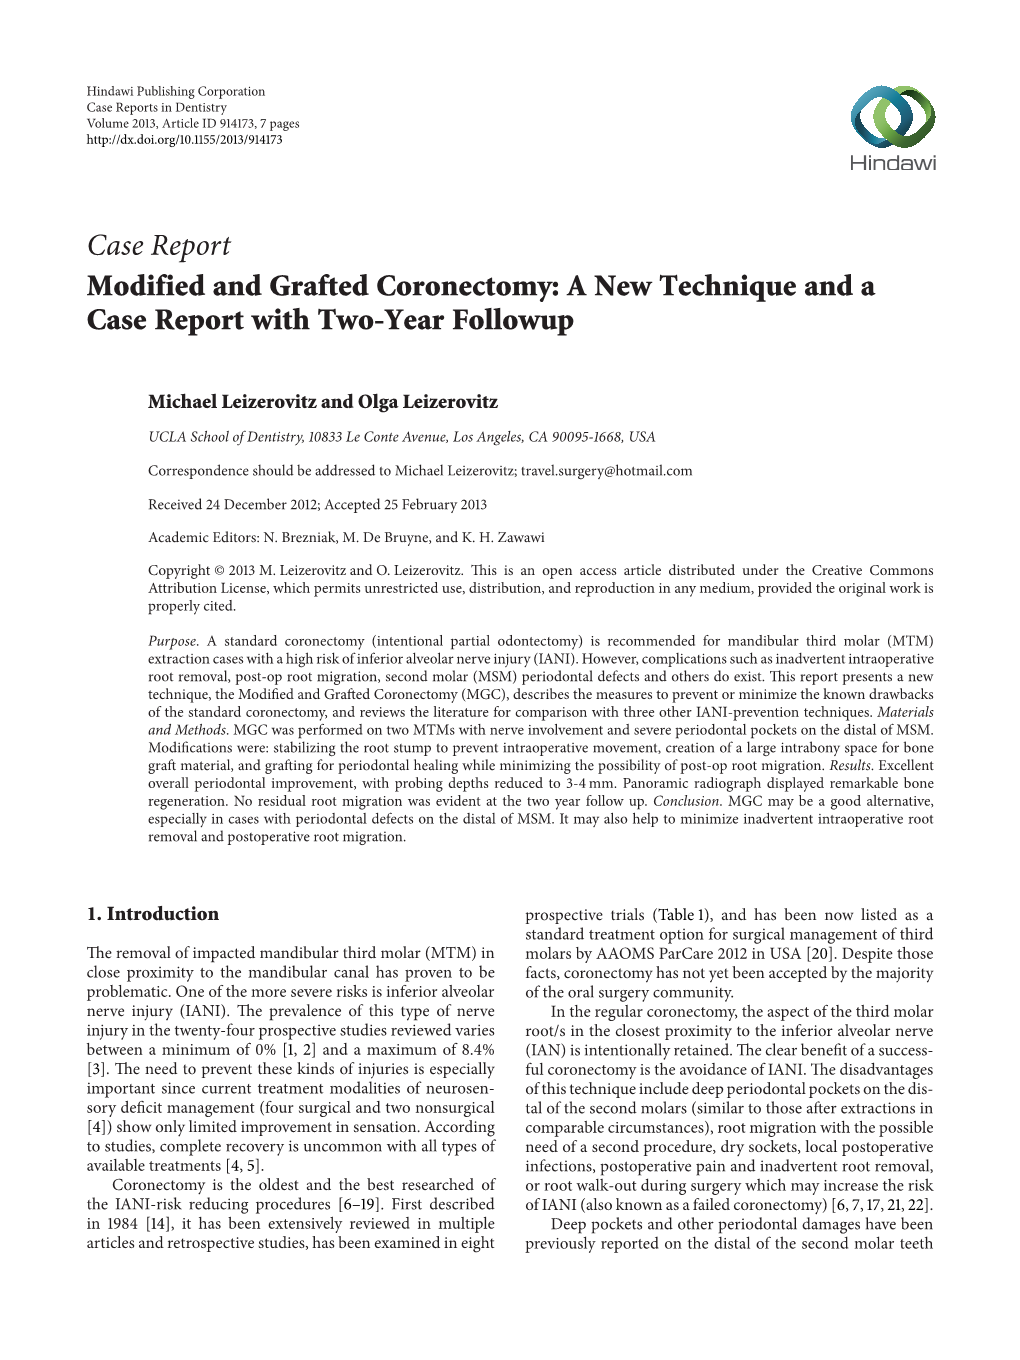 Modified and Grafted Coronectomy: a New Technique and a Case Report with Two-Year Followup